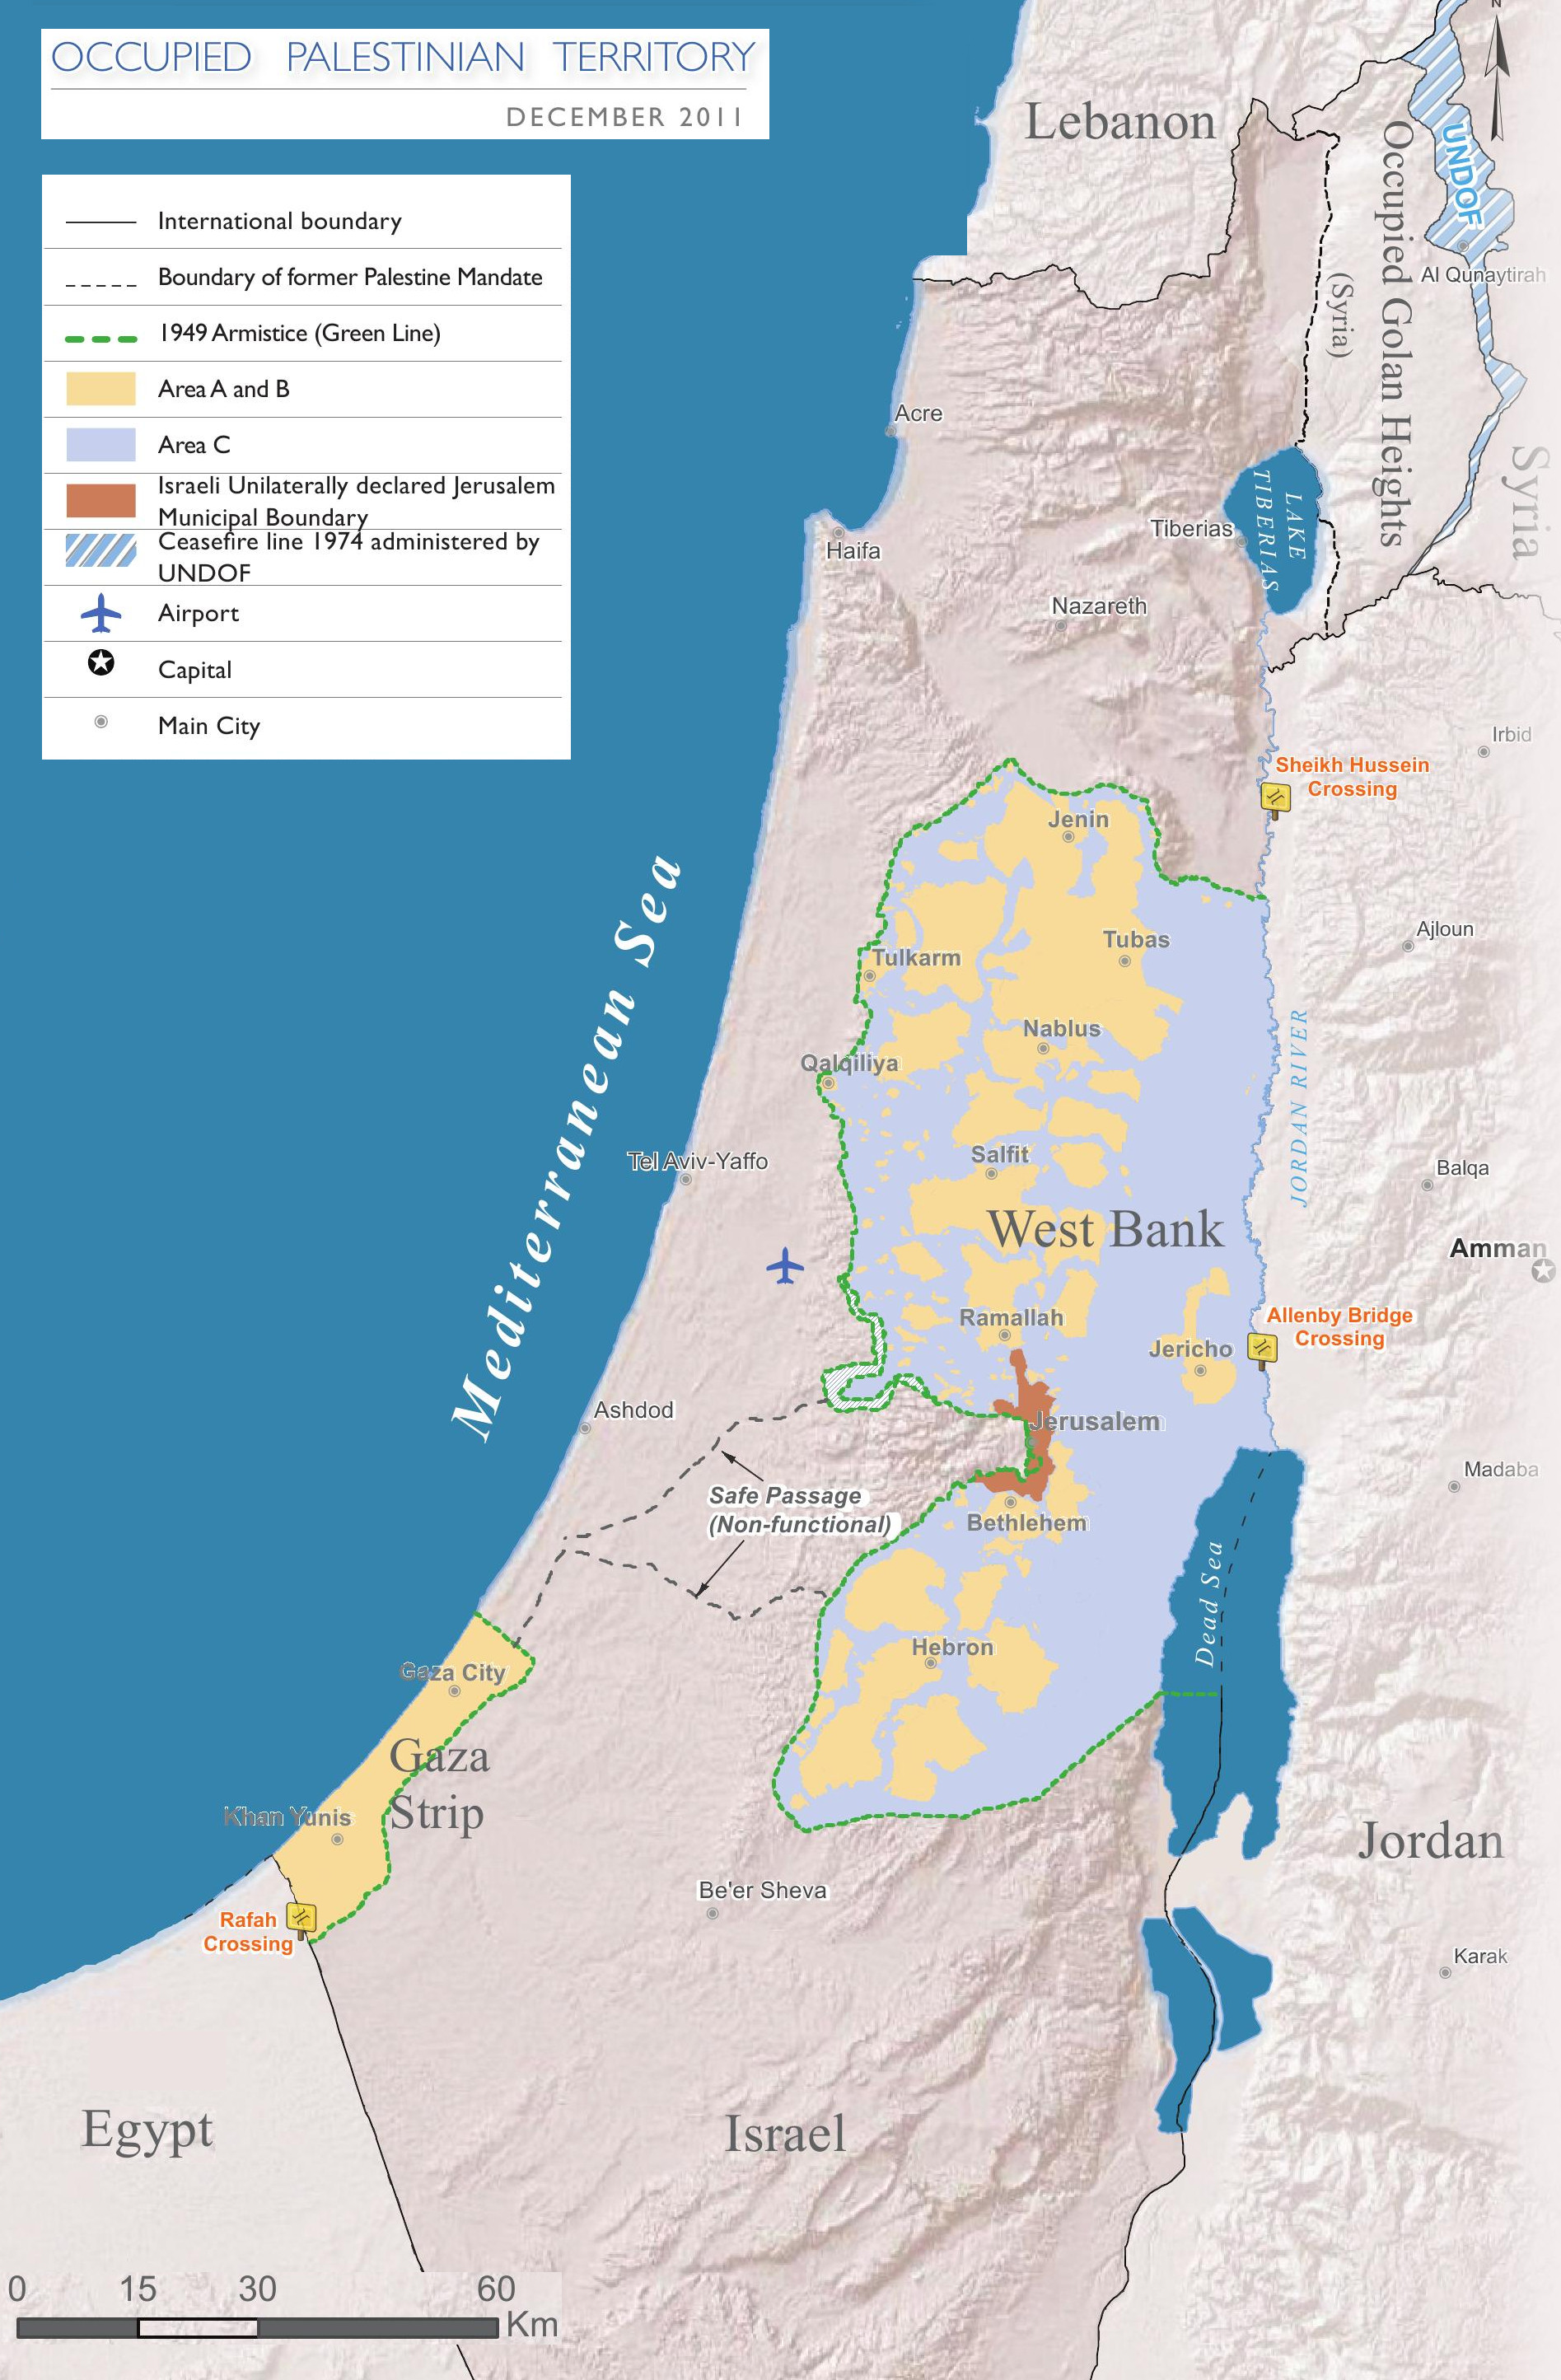 Map of the occupied Palestinian territories from 2011